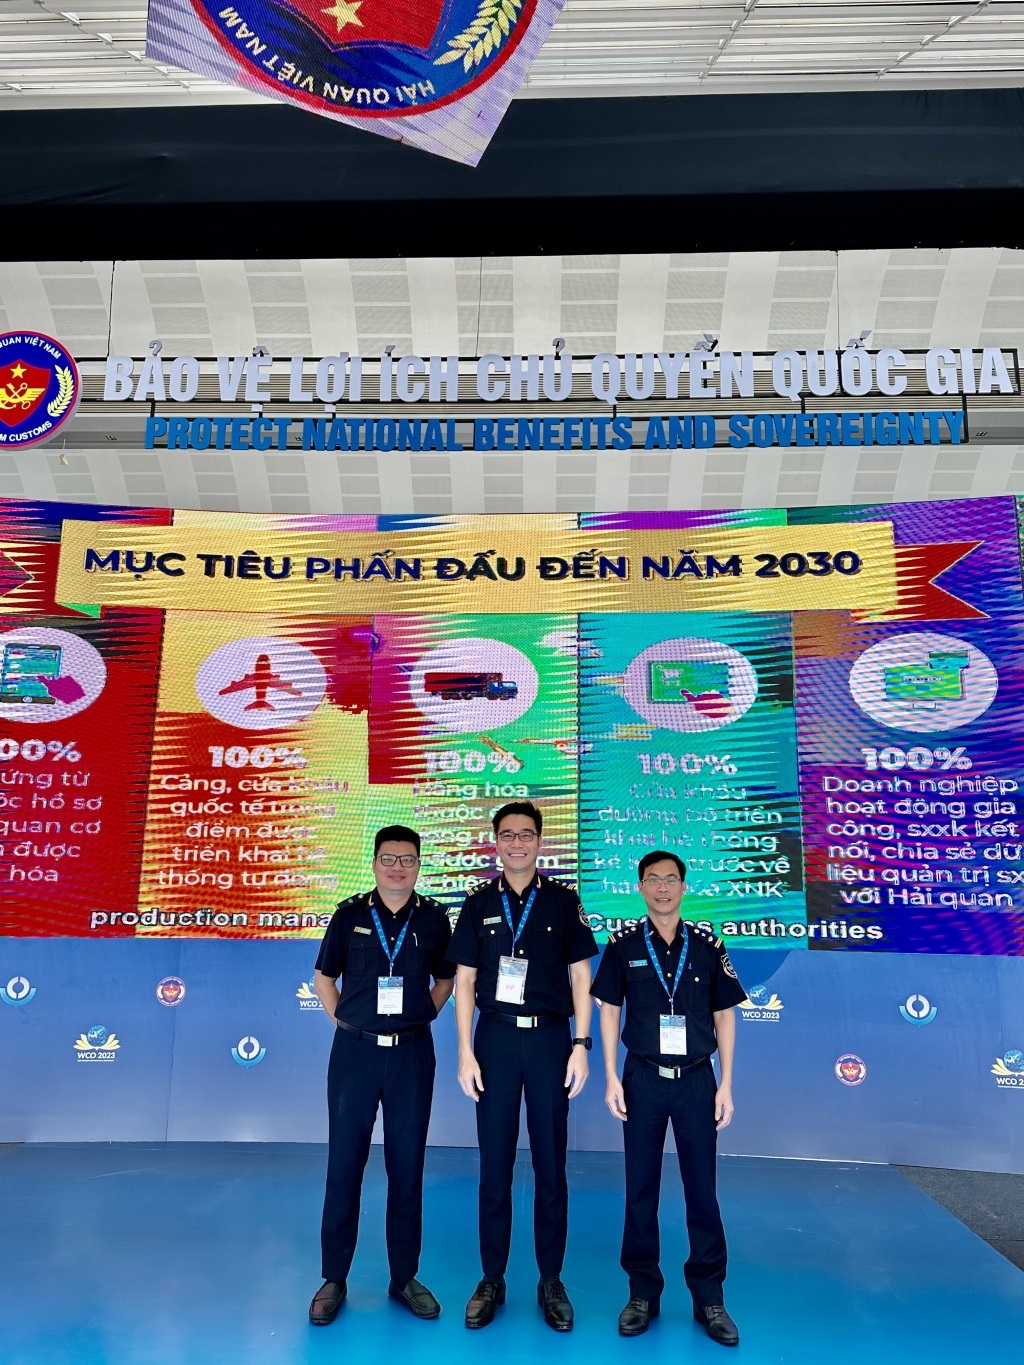 HCM city Customs Department to move in suitable direction towards Digital Customs